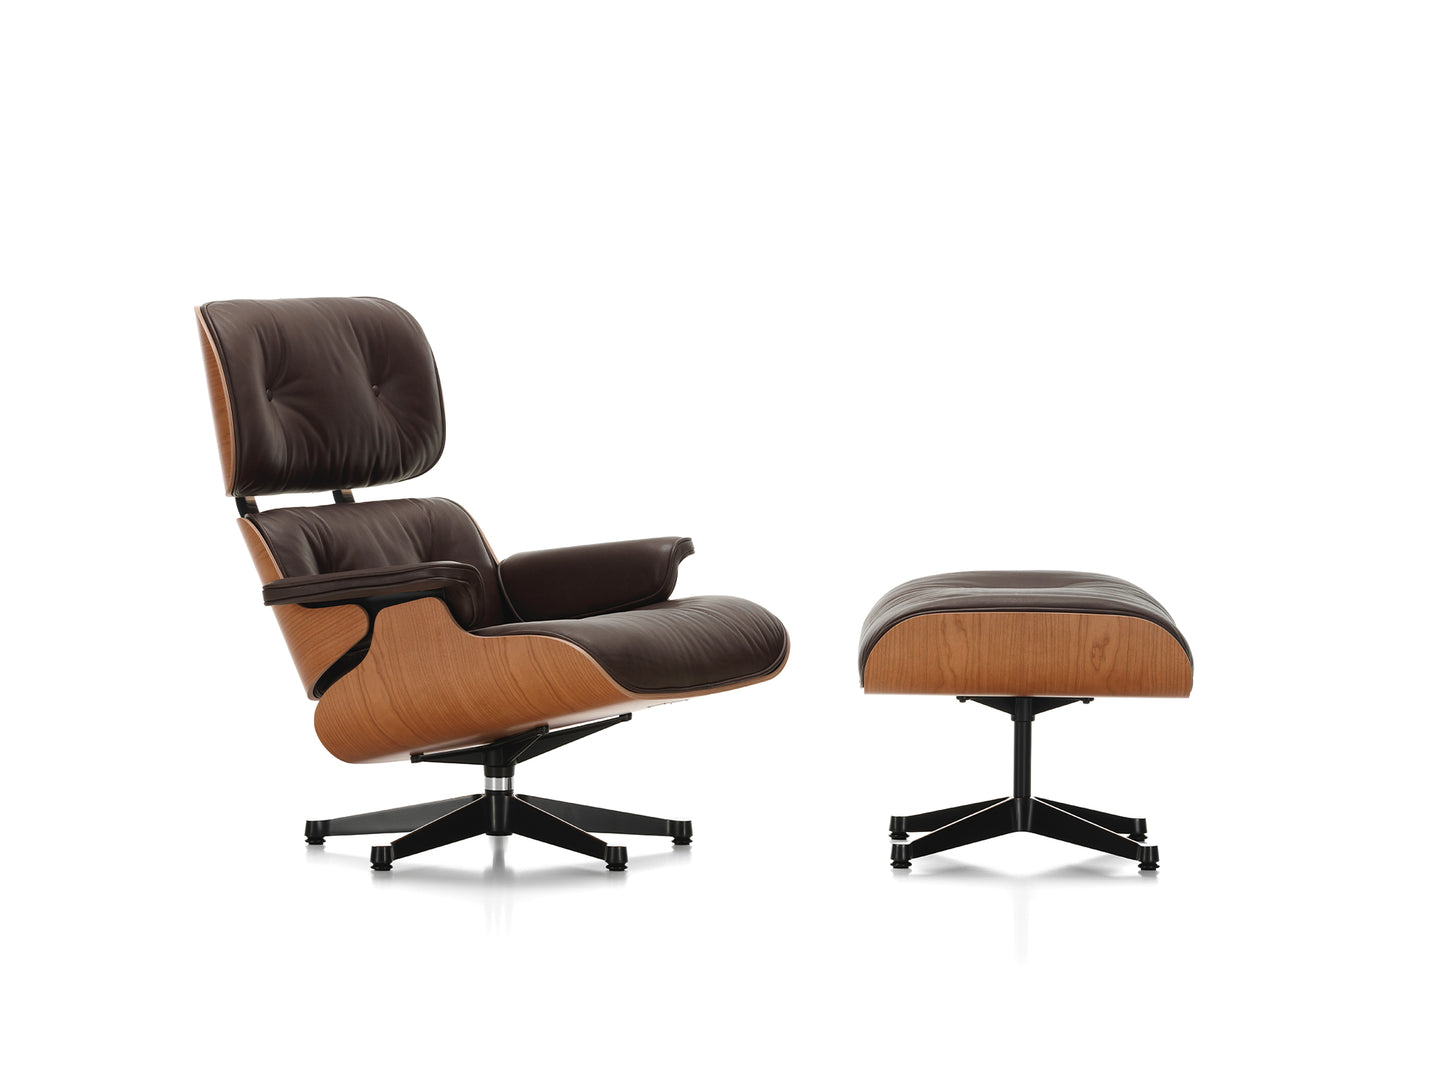 Eames Lounge Chair by Vitra - American Cherry / Chocolate